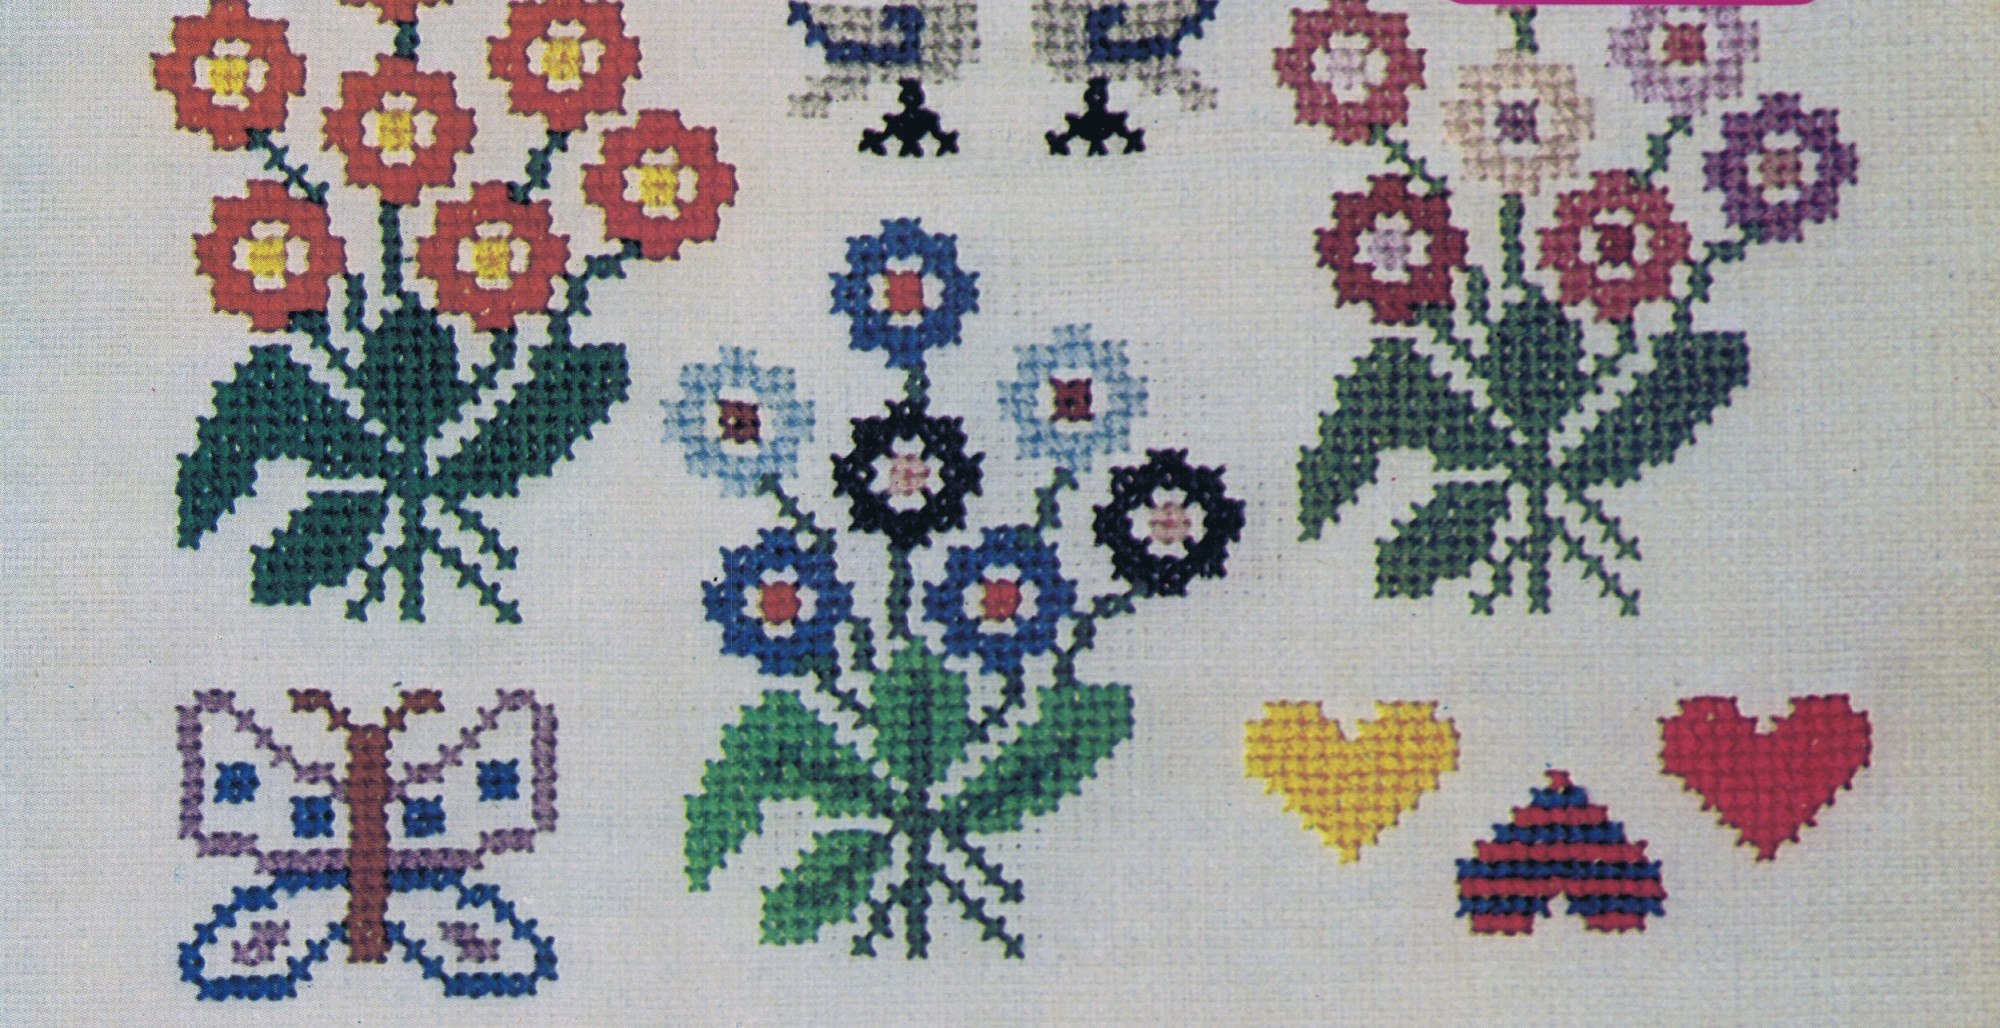 Embroidery Cross Sttich Blog Content11042014_00001 - Copy (2)